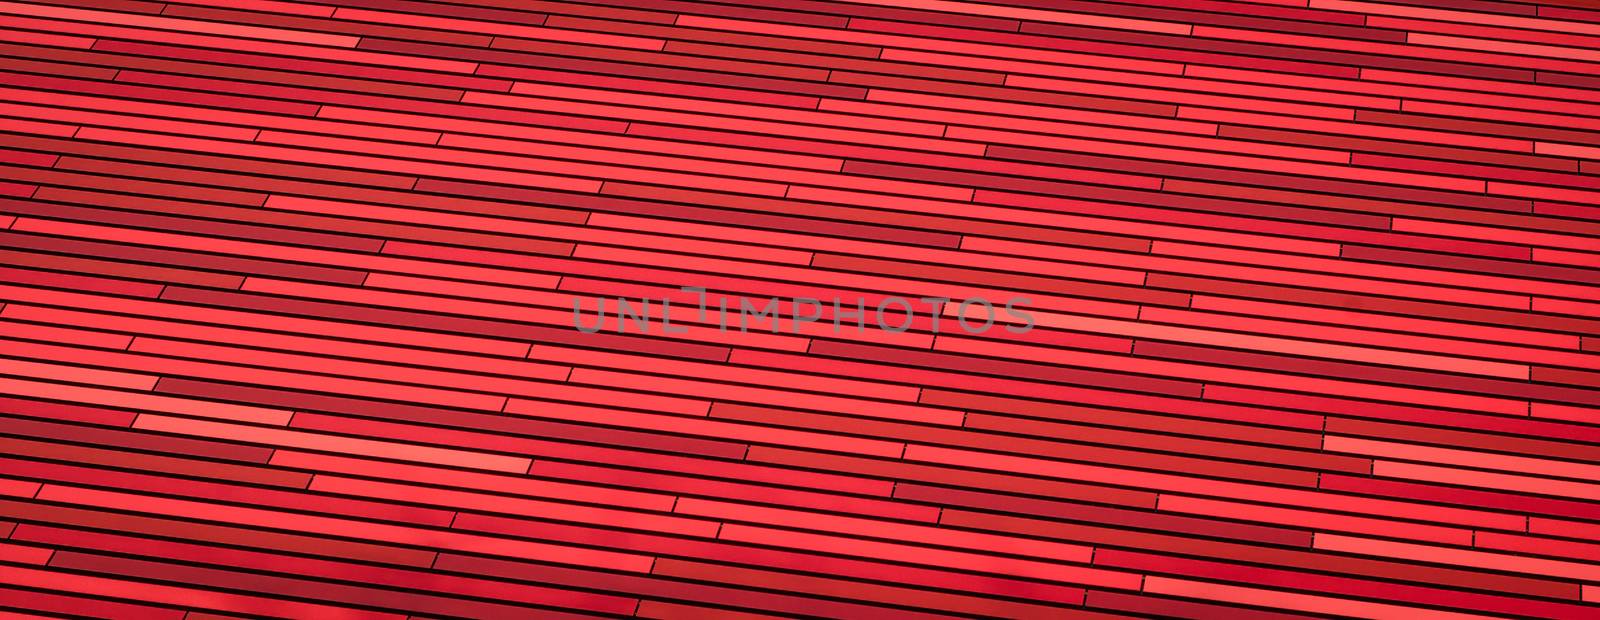 Architecture Background Pattern Of Multi-Colored Red Tiles